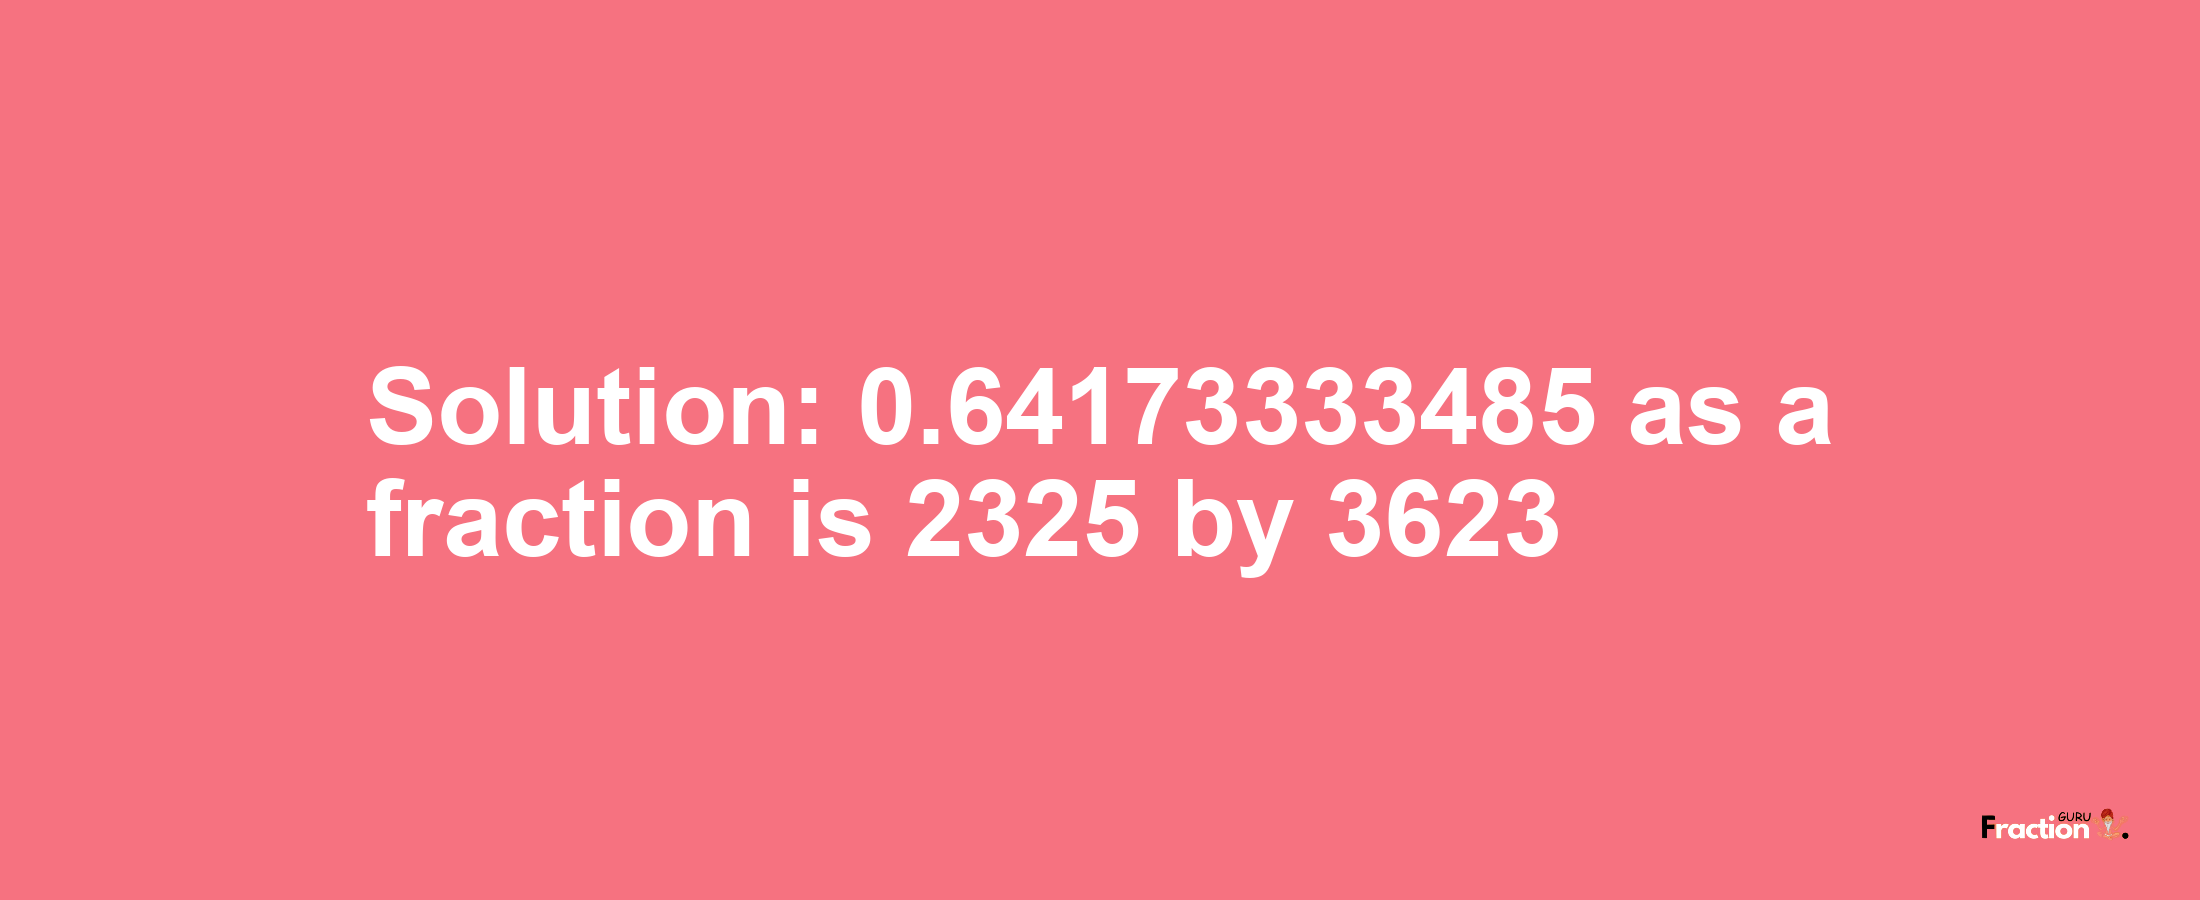 Solution:0.64173333485 as a fraction is 2325/3623